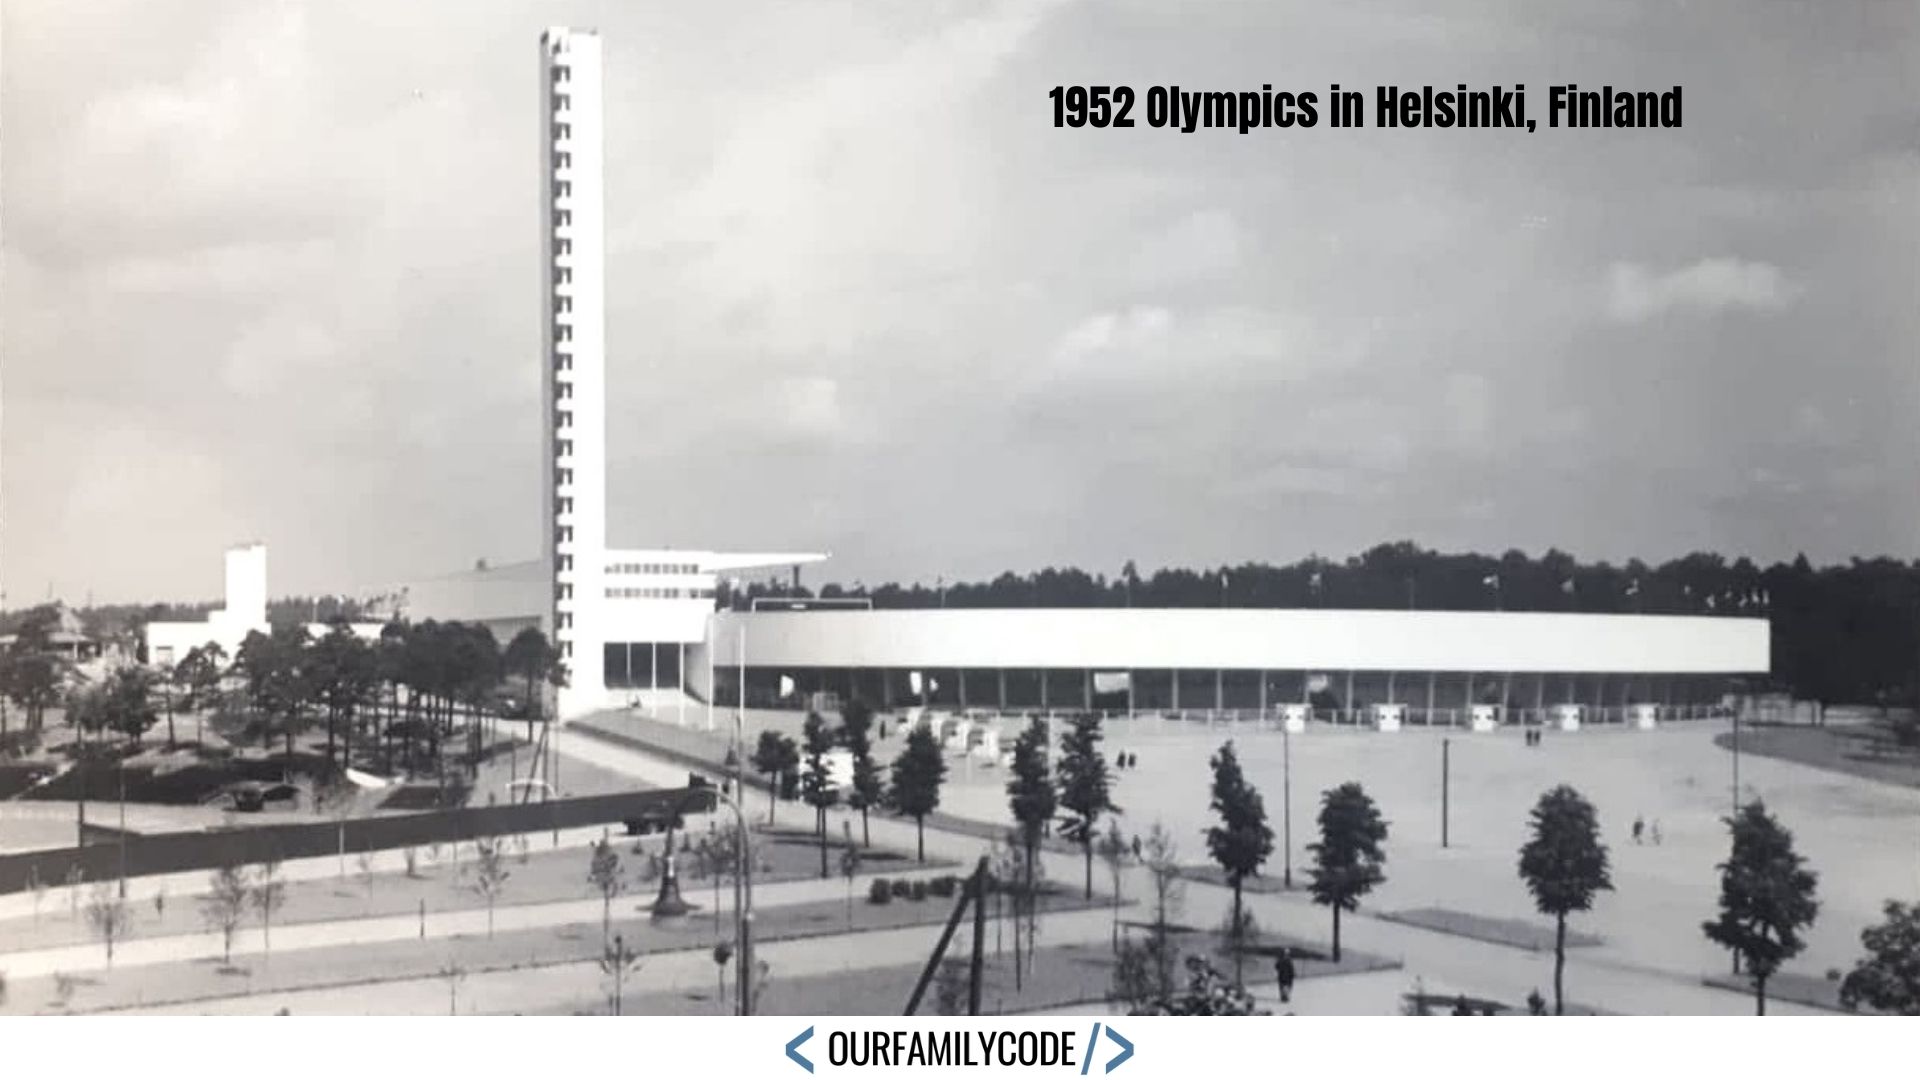 A picture of the The Helsinki Olympic Stadium was built for the 1940 Games, but later used during the 1952 Olympics in Helsinki, Finland.